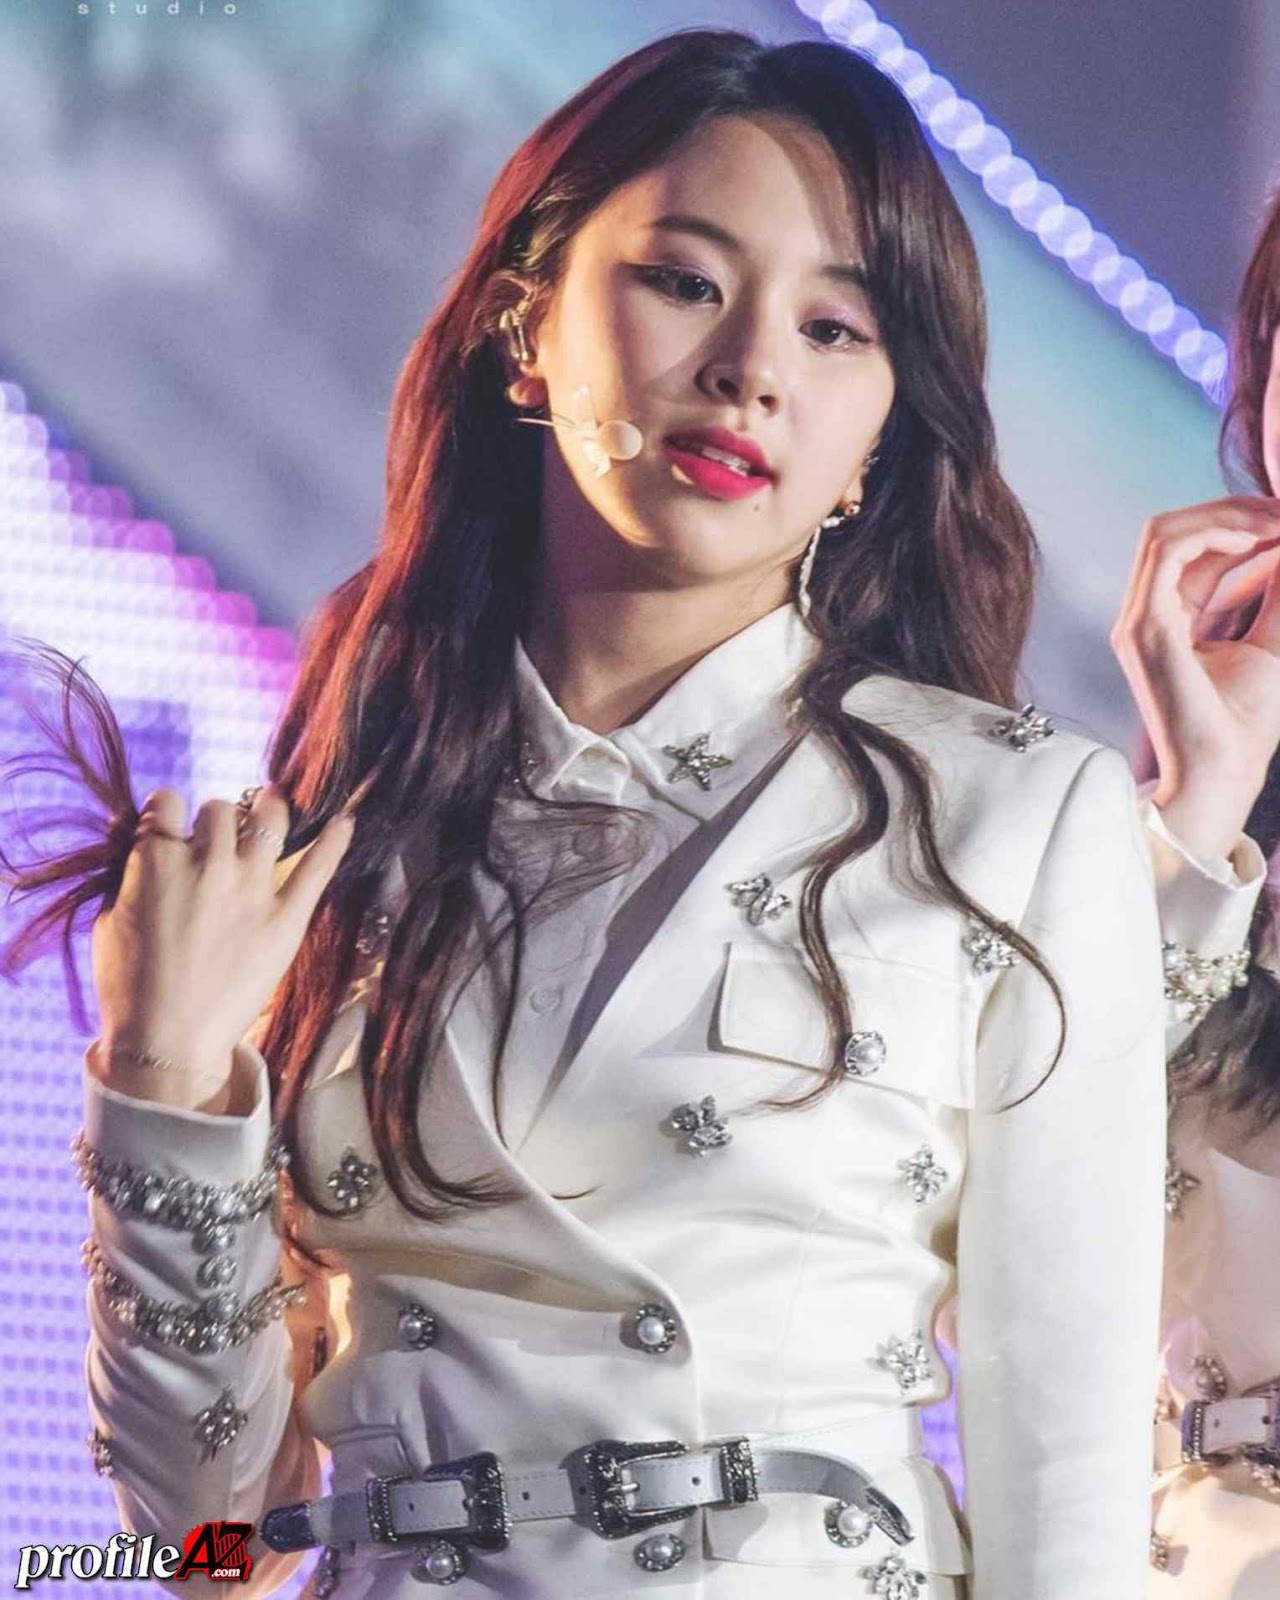 Chaeyoung (Twice) Profile, Photos, Fact, Bio and More - Biotist